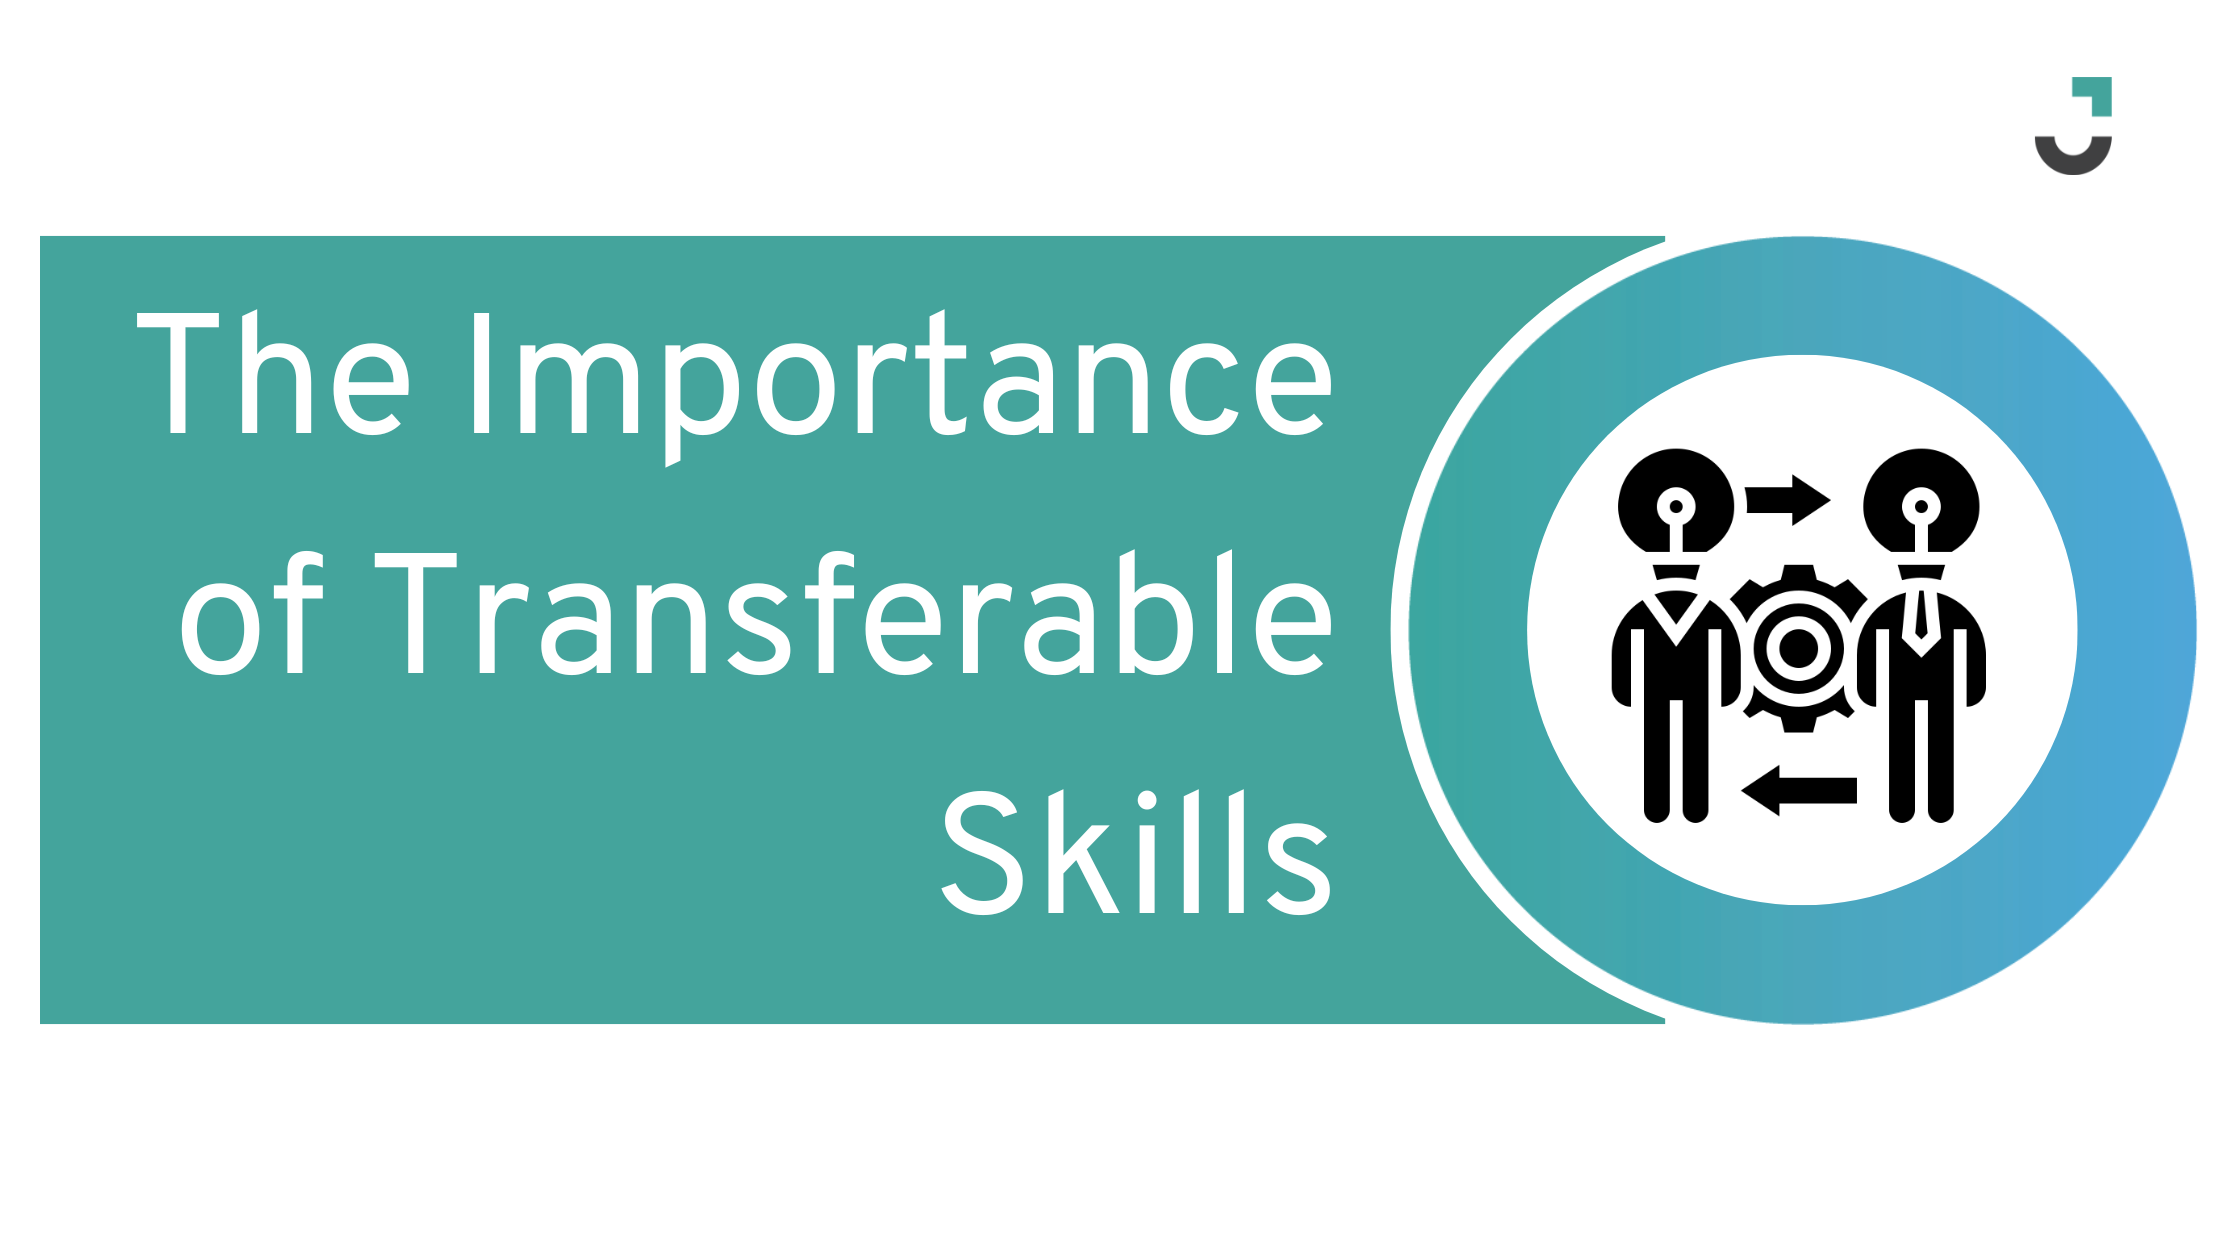 The Importance of Transferable Skills